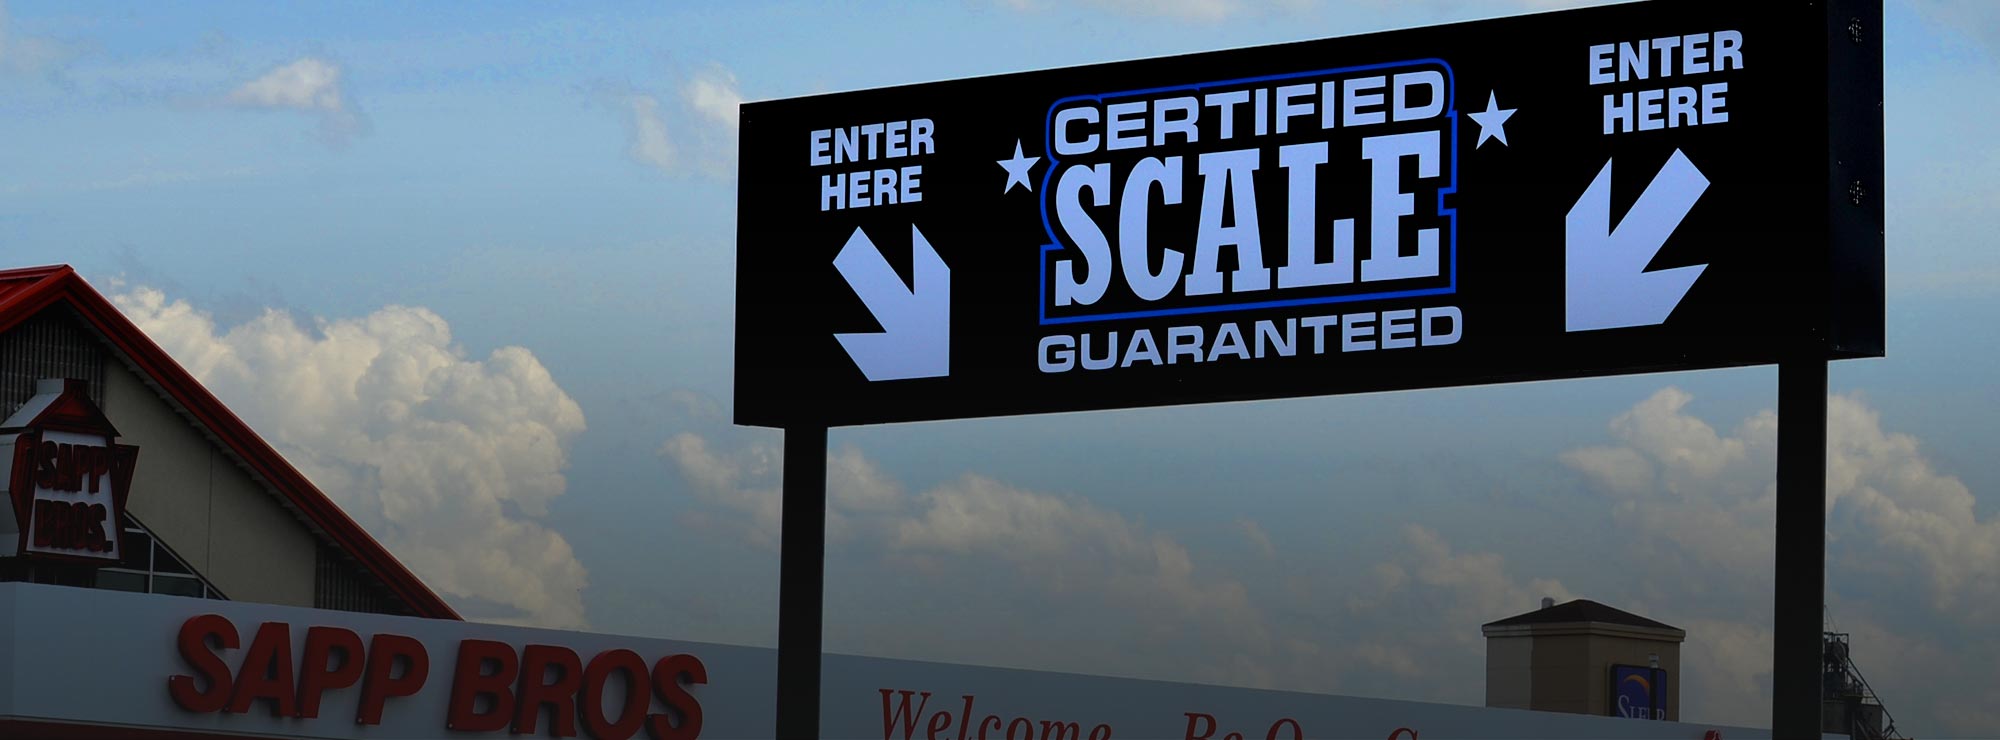  Certified Scales